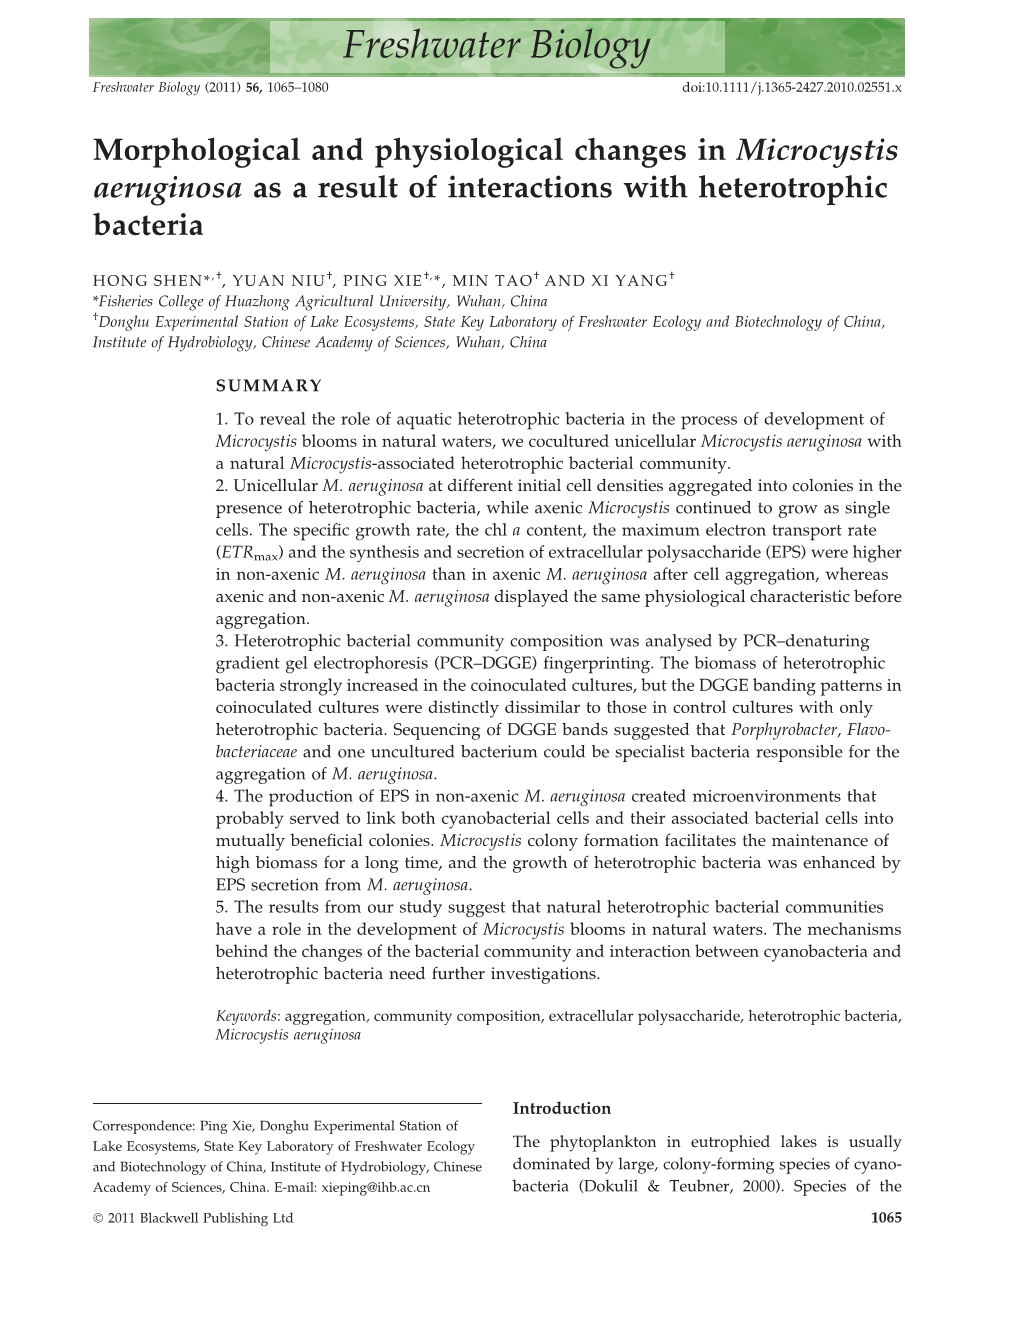 Morphological and Physiological Changes in Microcystis Aeruginosa As a Result of Interactions with Heterotrophic Bacteria